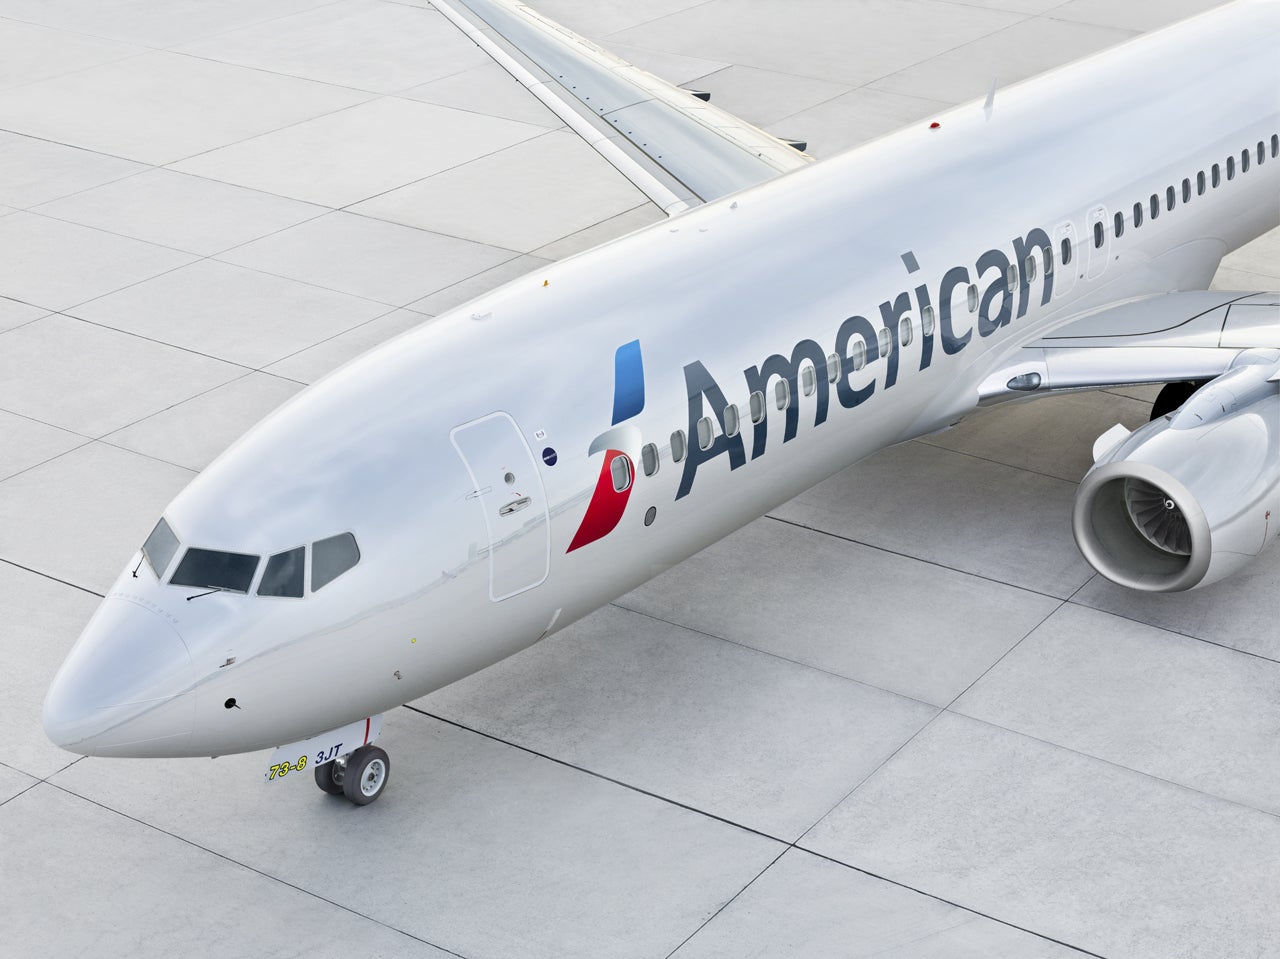 DOT Report: American Airlines Flew Unairworthy Aircraft